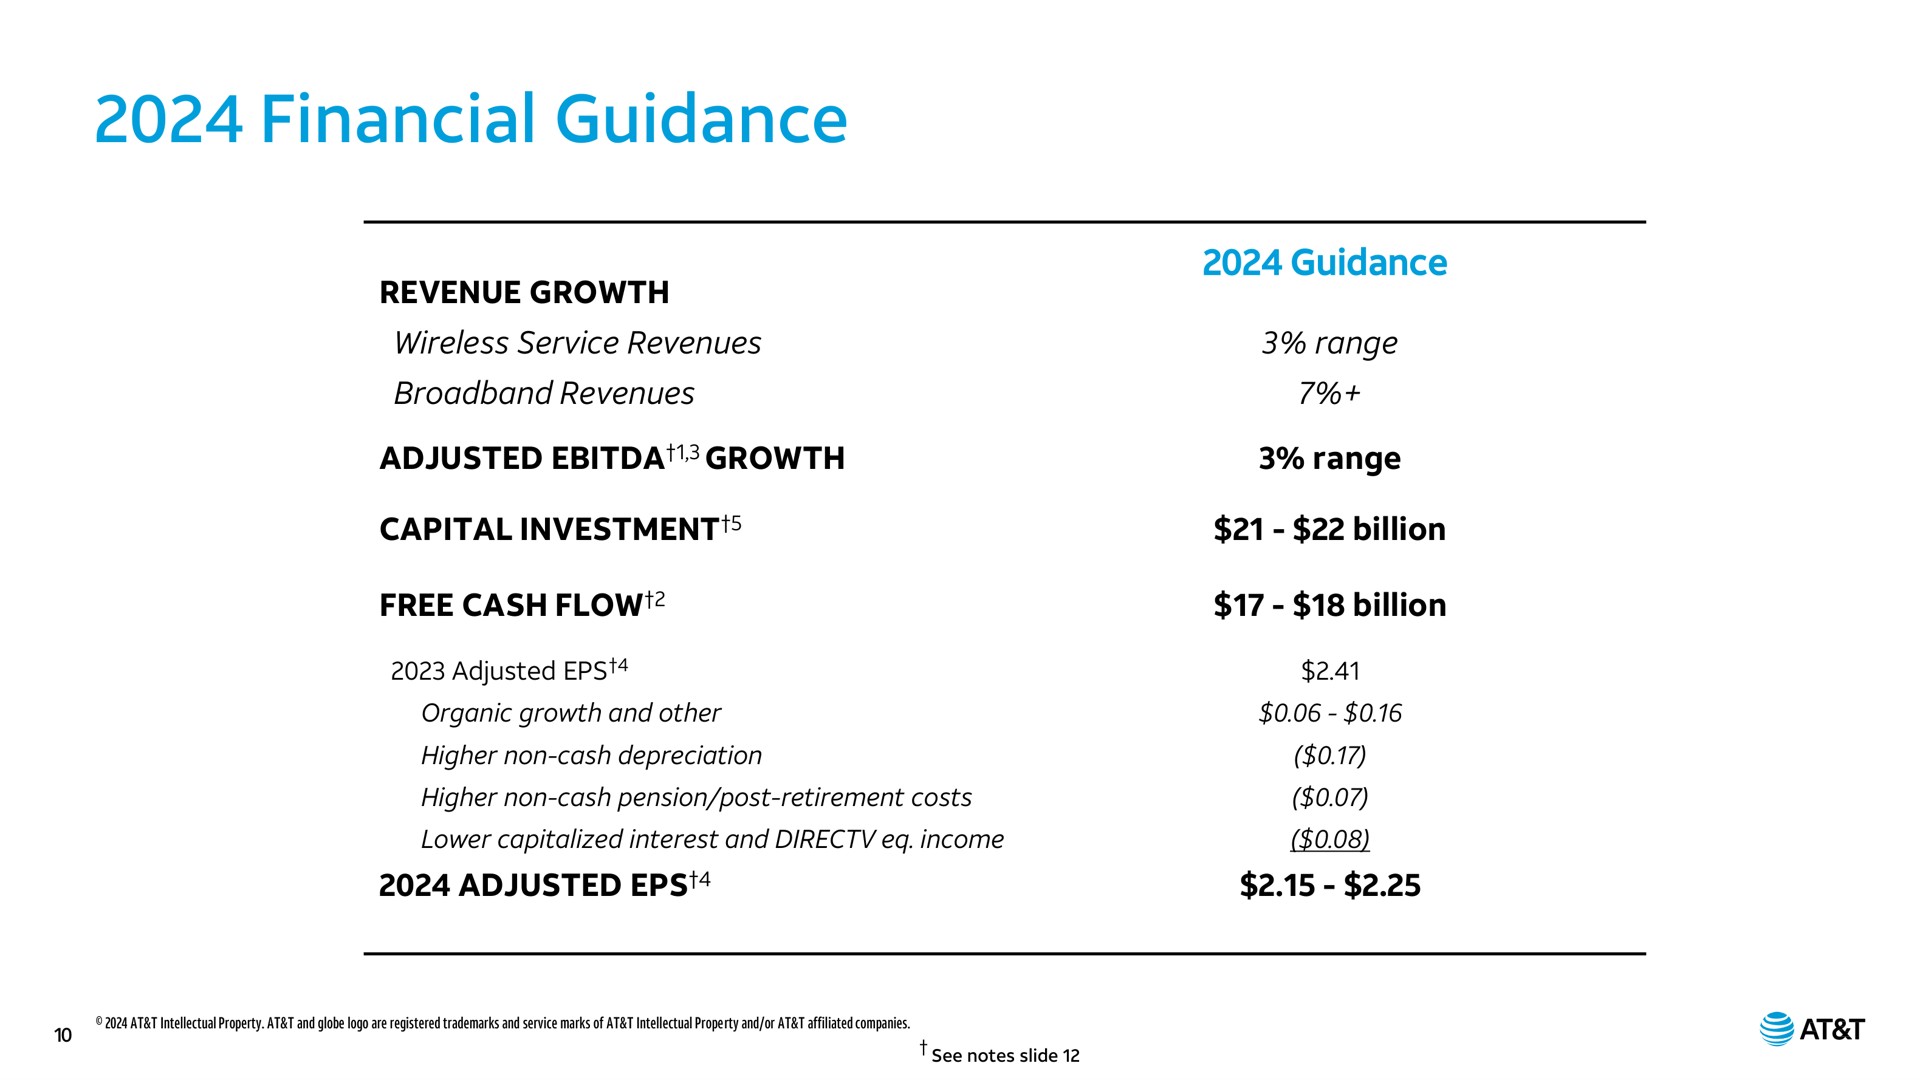 financial guidance revenue growth wireless service revenues revenues adjusted growth capital investment free cash flow adjusted organic growth and other higher non cash depreciation higher non cash pension post retirement costs lower capitalized interest and income adjusted guidance range range billion billion at | AT&T